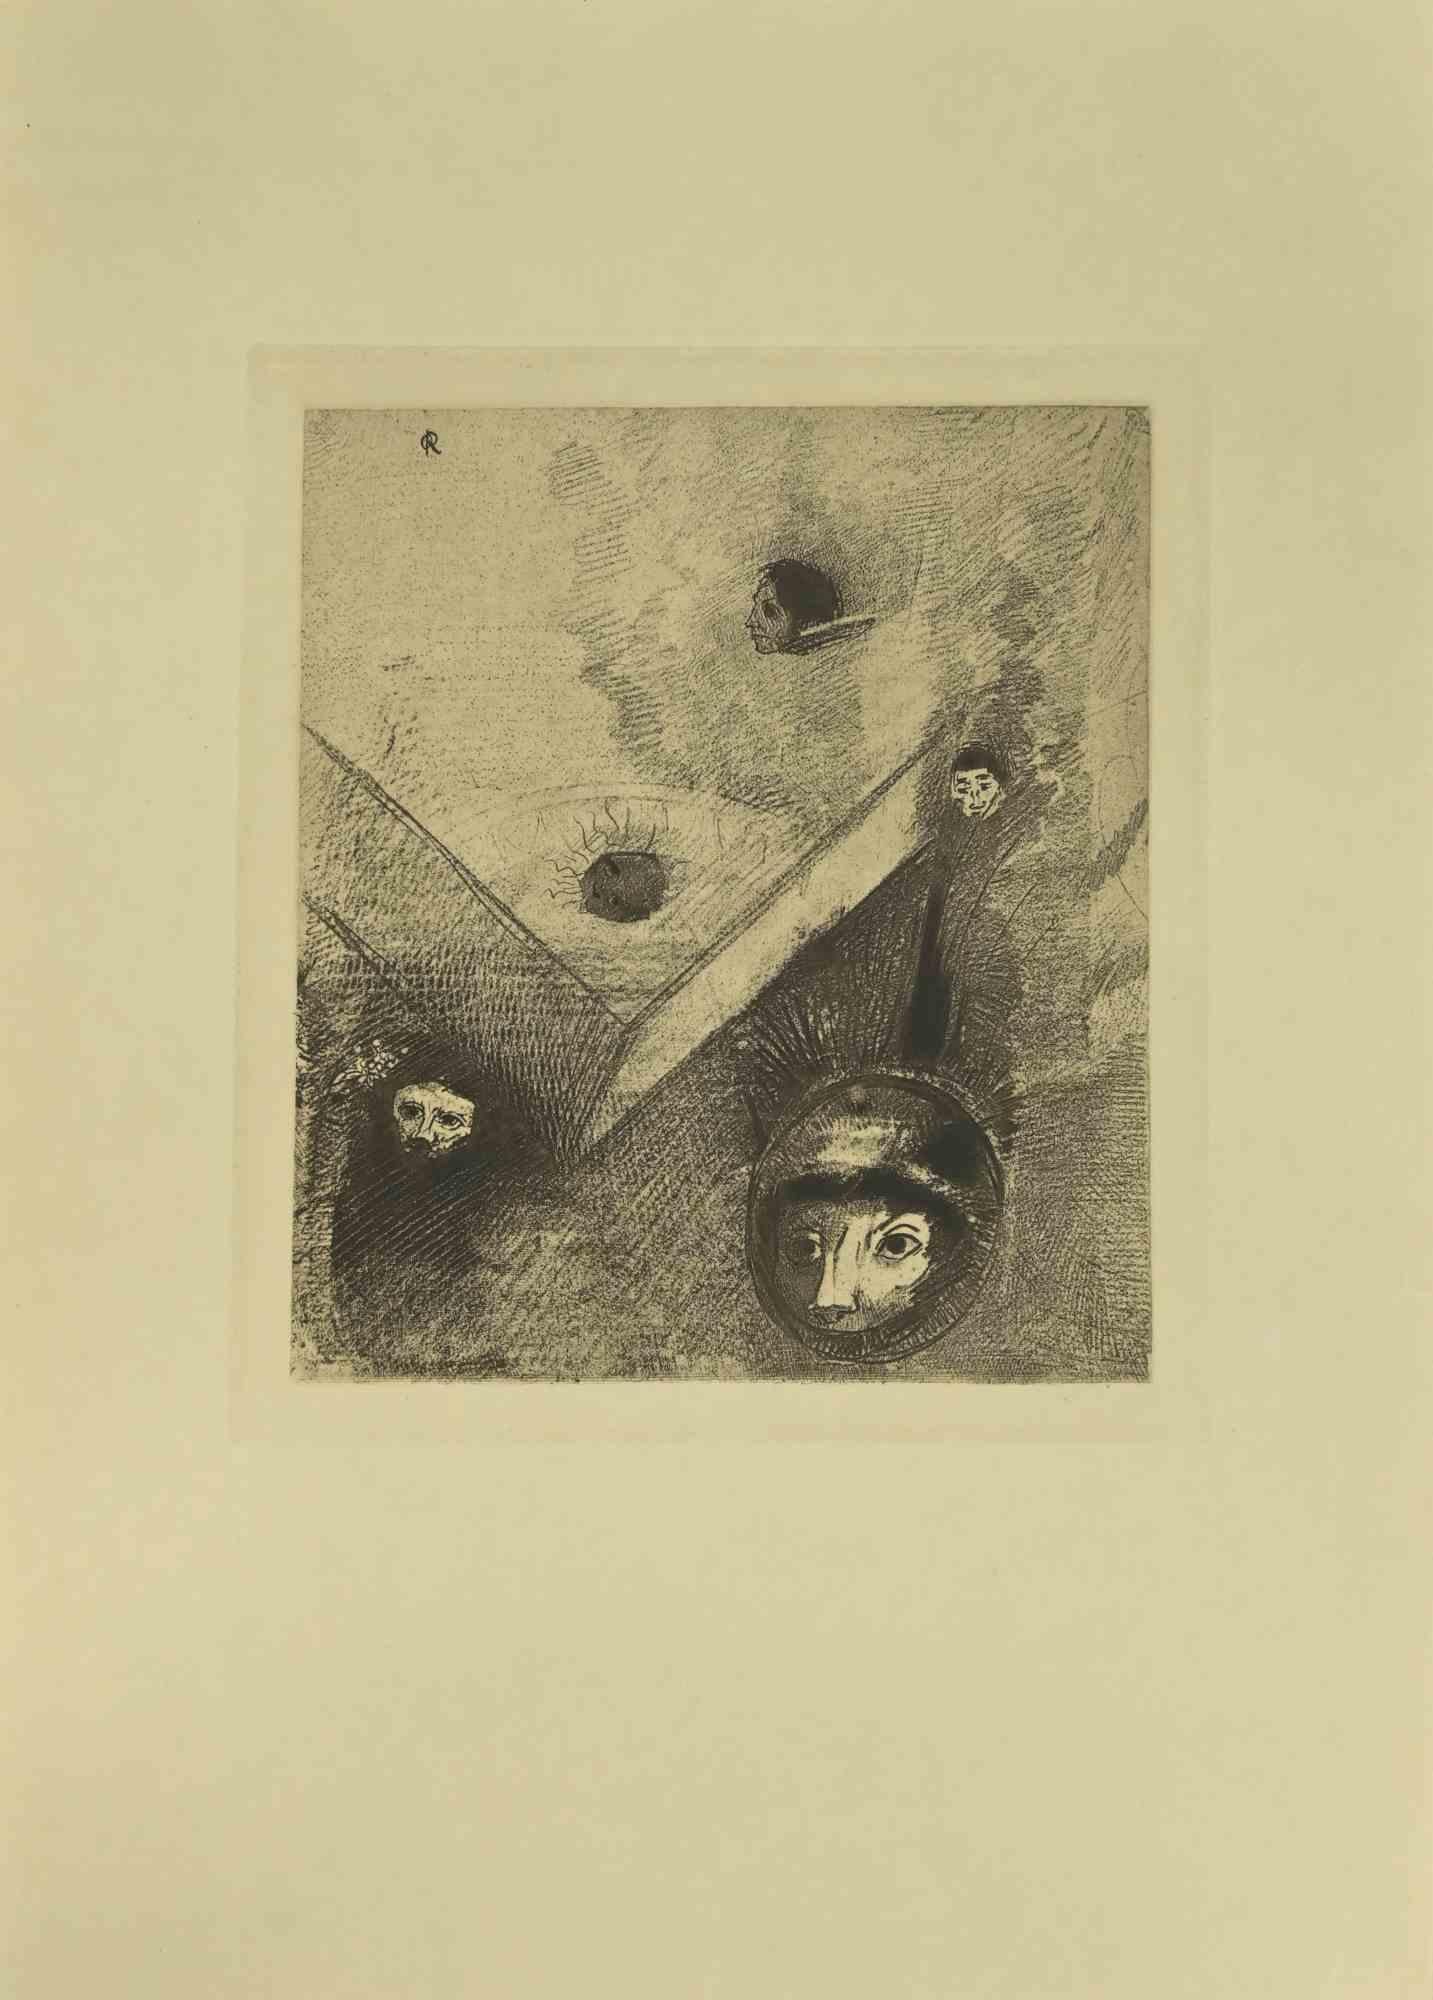 Illustration from the series "Les Fleurs du Mal" is an etching print realized after Odilon Redon and published by Henri Felury in 1923.

Monogrammed in the plate.

Good conditions.

Odilon Redon  (Bordeaux, 1840 - Paris, France). Redon's